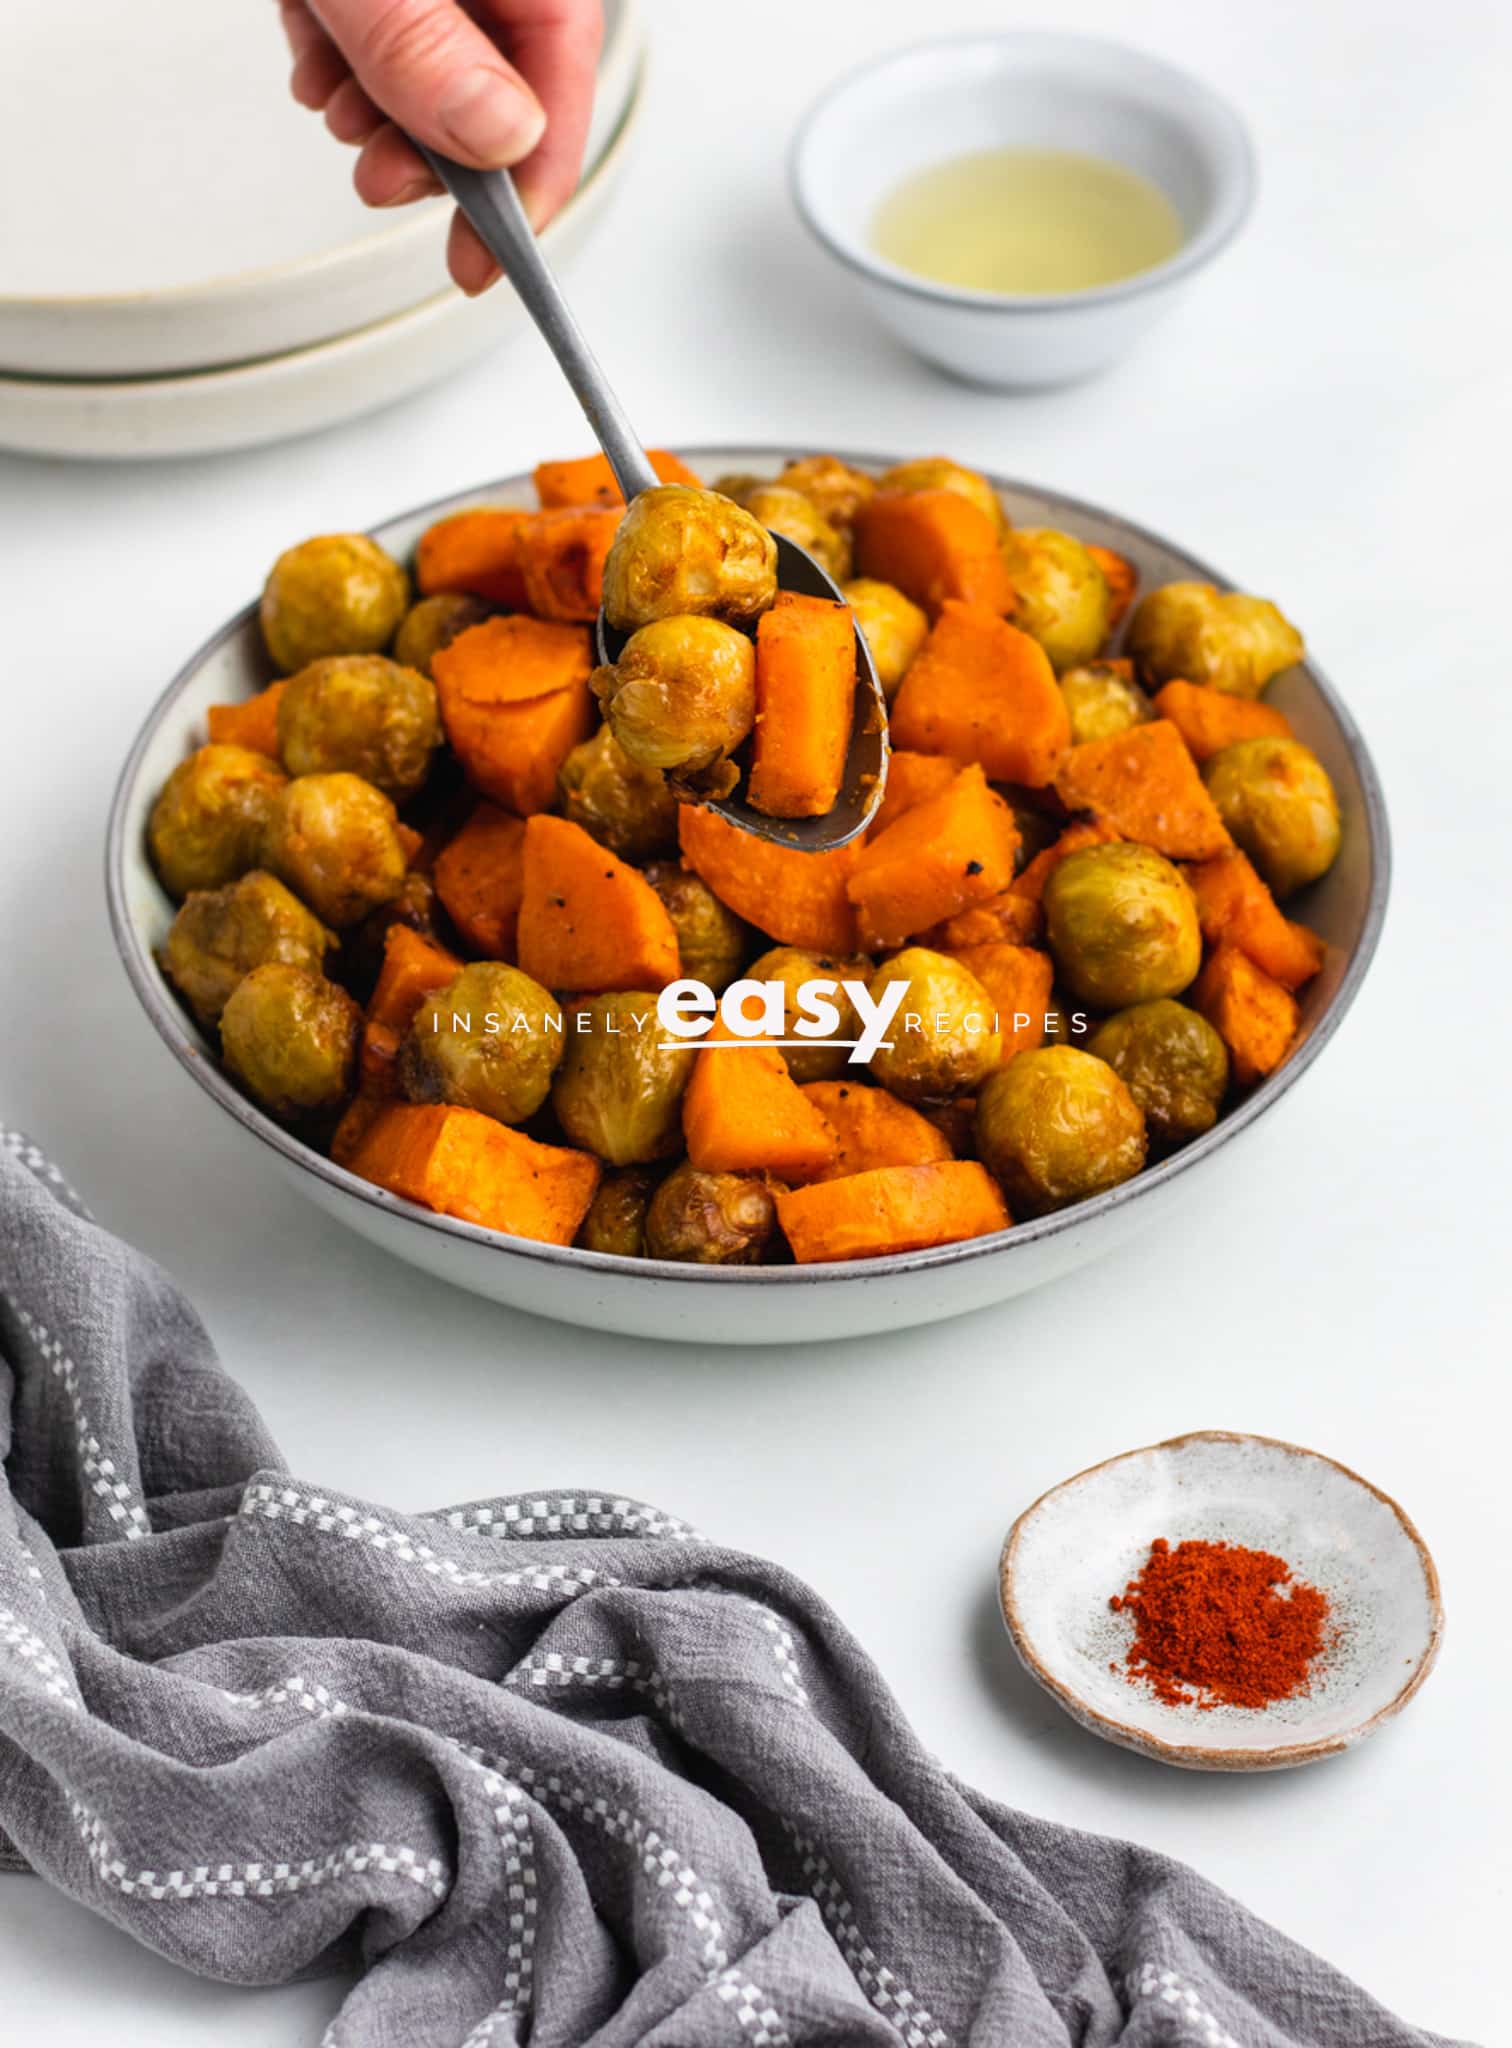 Photo of a hand holding a spoon, and scooping freshly roasted brussel sprouts and sweet potatoes out of a white bowl. 